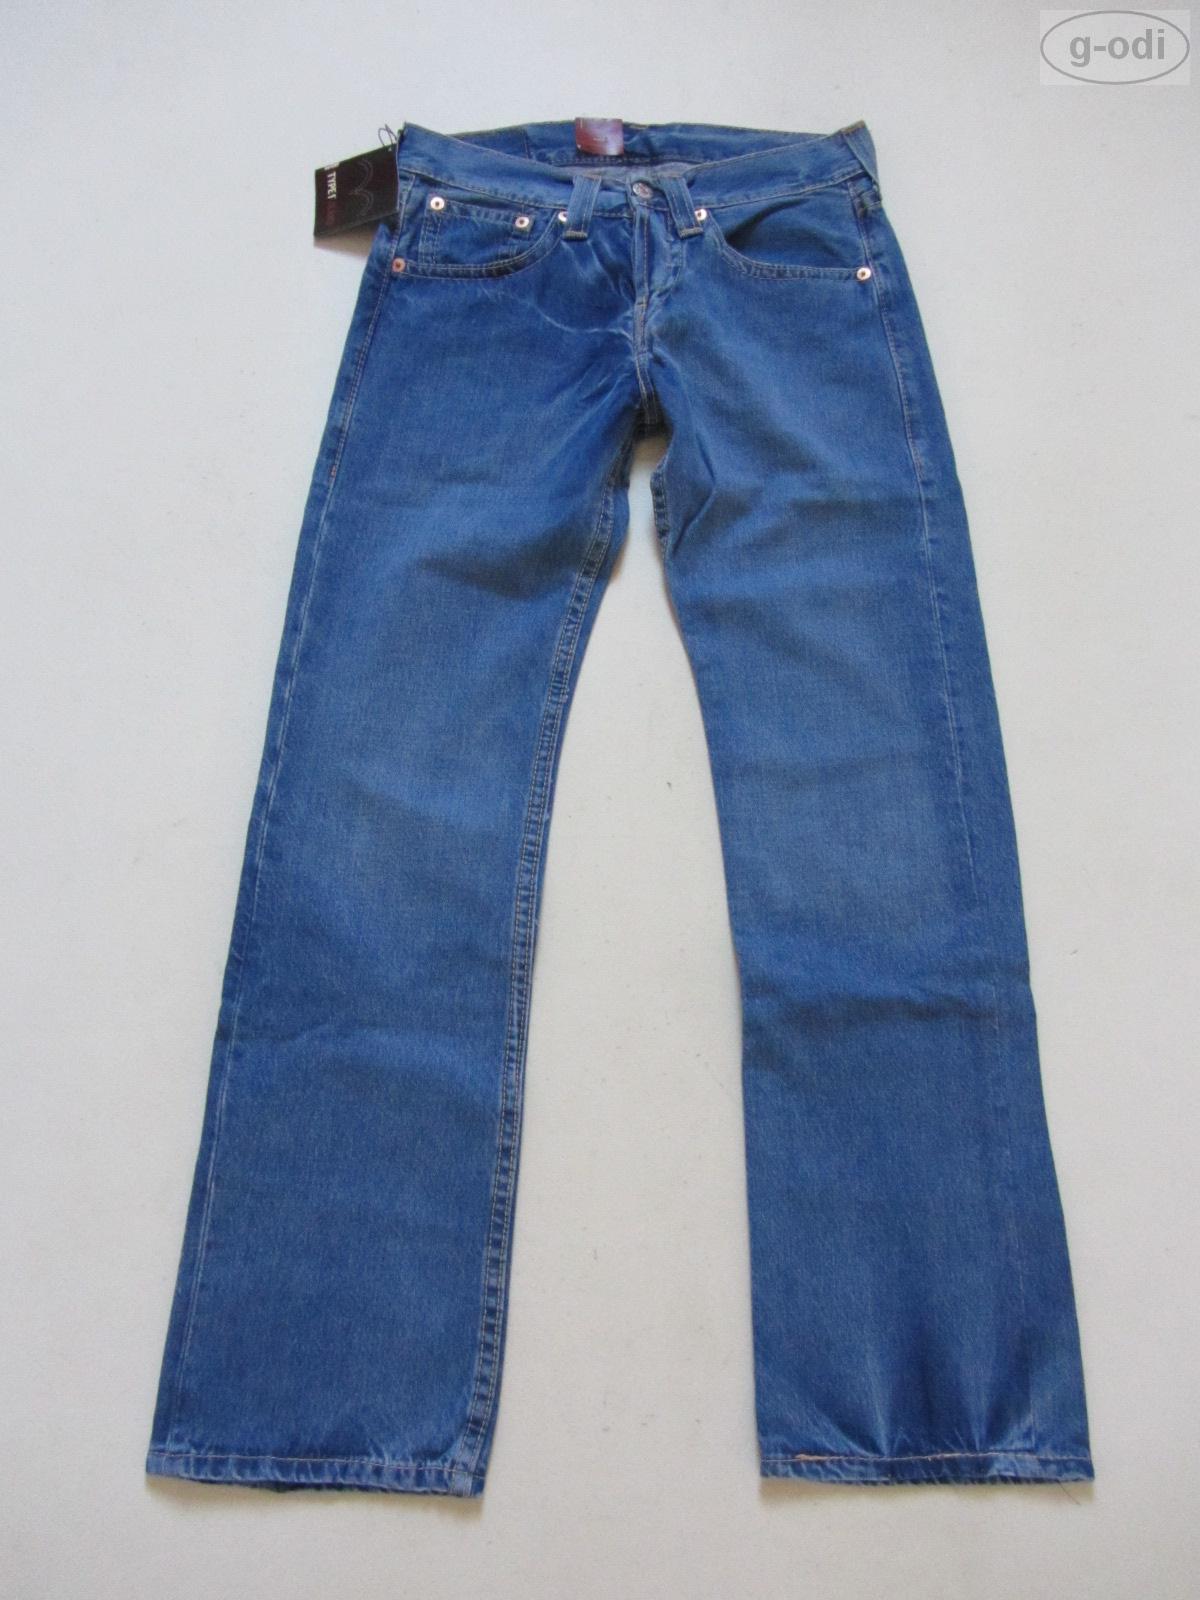 Levi'S TYPE 1 Lot 901 Jeans Trousers W 30/L 32, NEW! Gold Diggers UR-Jeans, Rare! | eBay